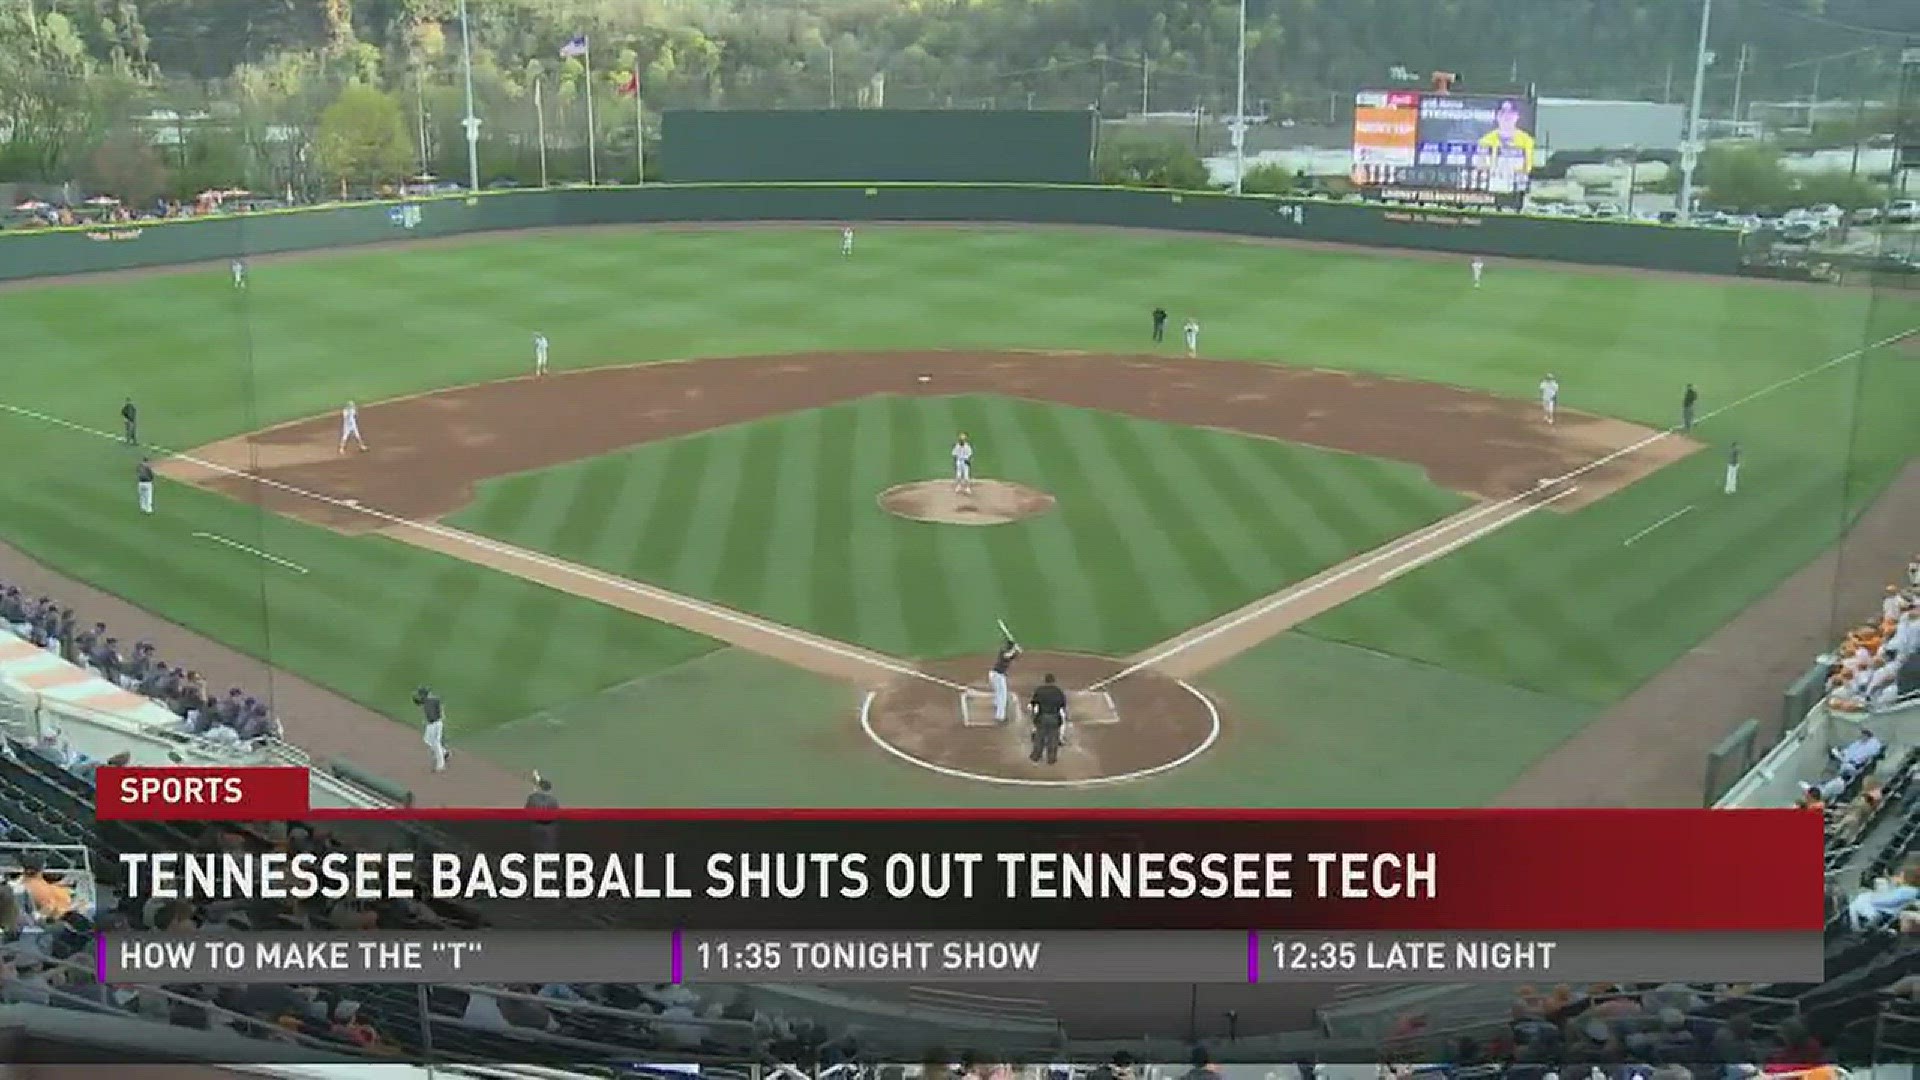 Tennessee softball shuts out Liberty while the UT baseball team shuts out Tennessee Tech on Tuesday.